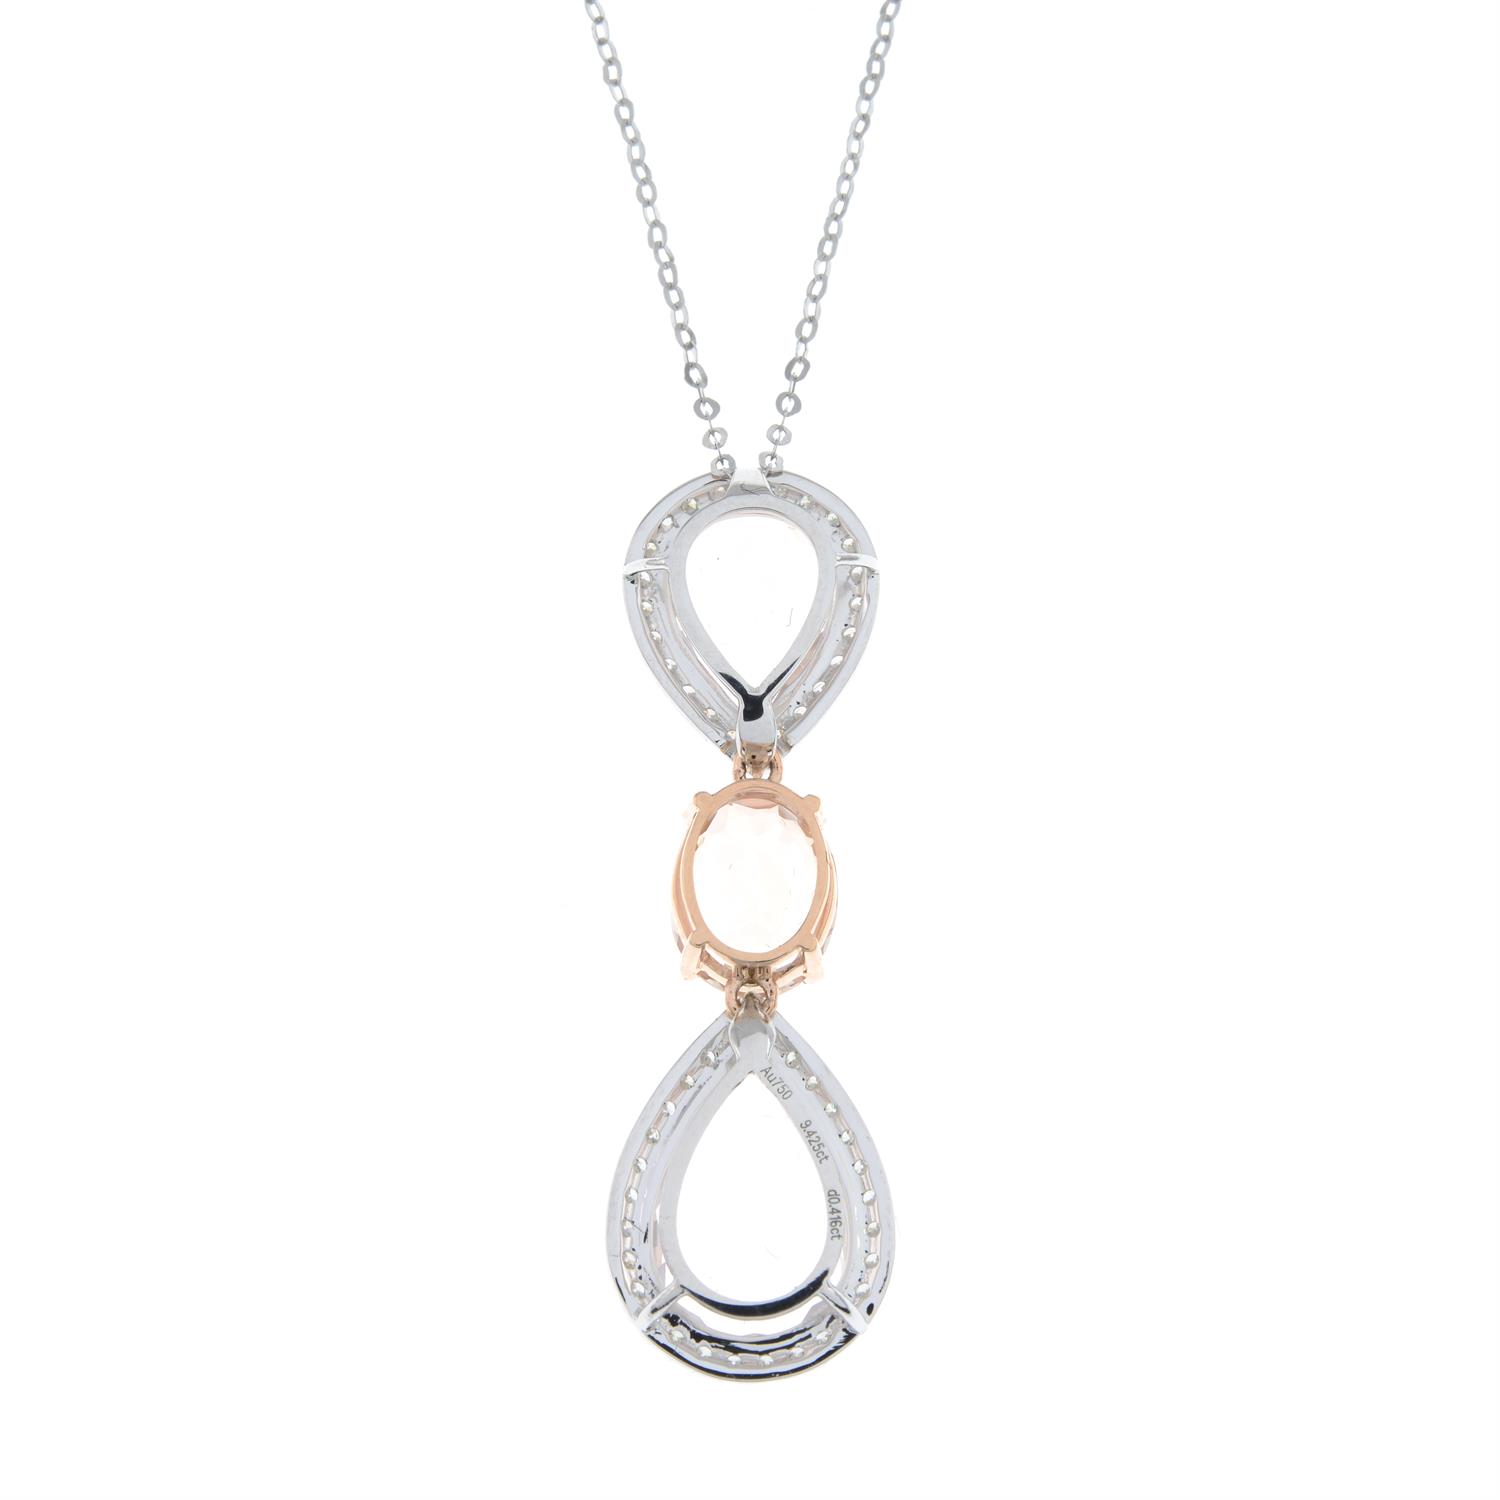 Morganite and diamond pendant, with chain - Image 3 of 5